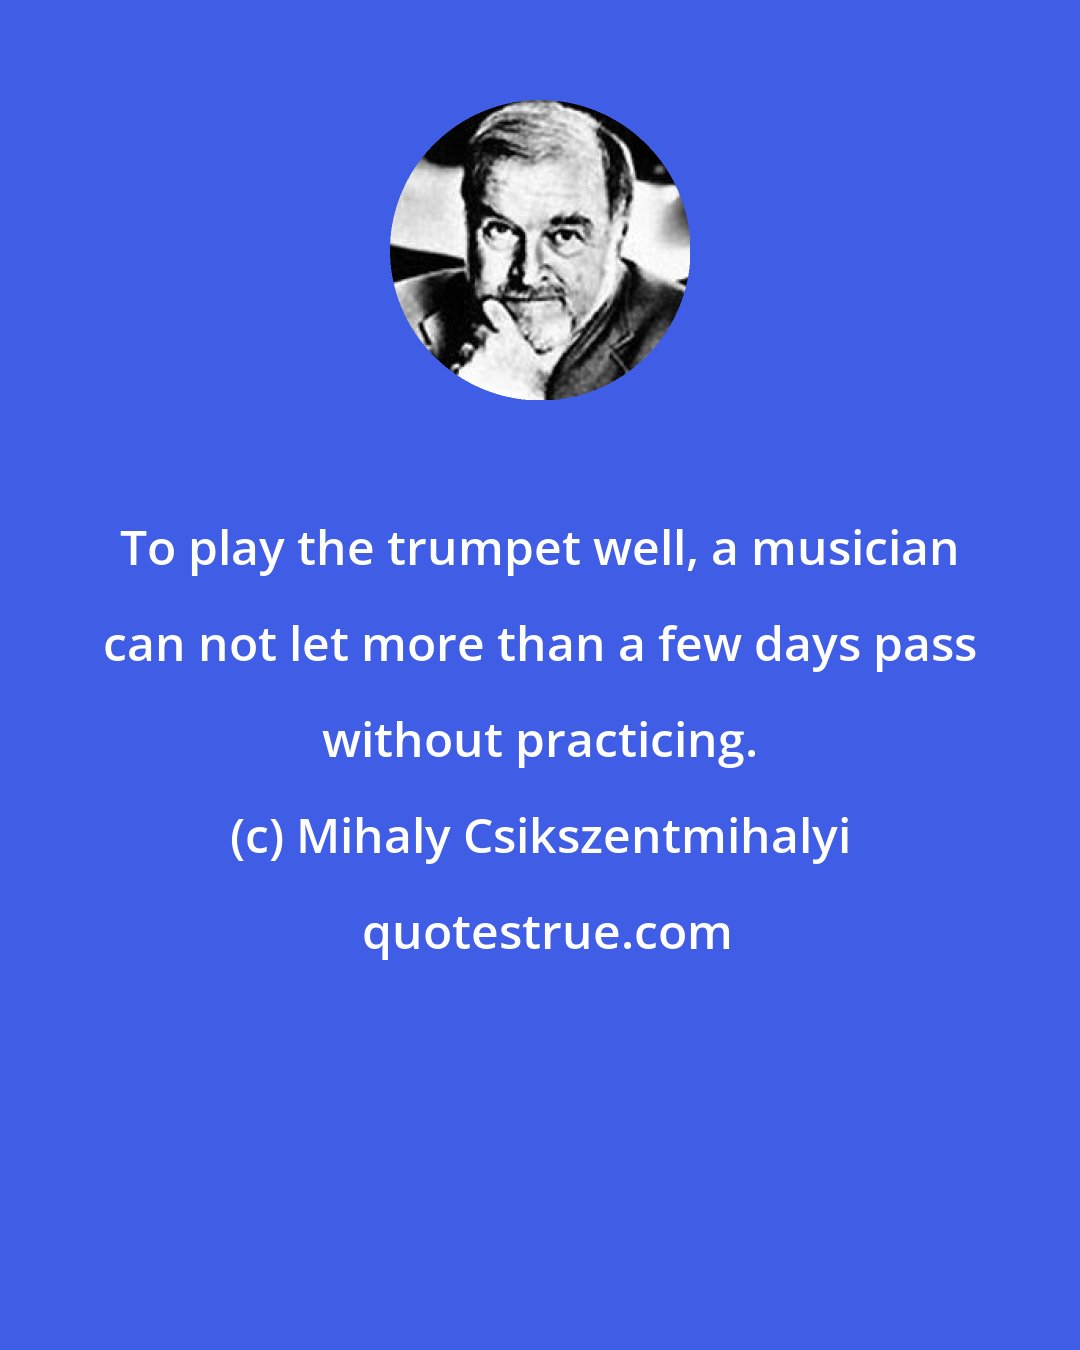 Mihaly Csikszentmihalyi: To play the trumpet well, a musician can not let more than a few days pass without practicing.